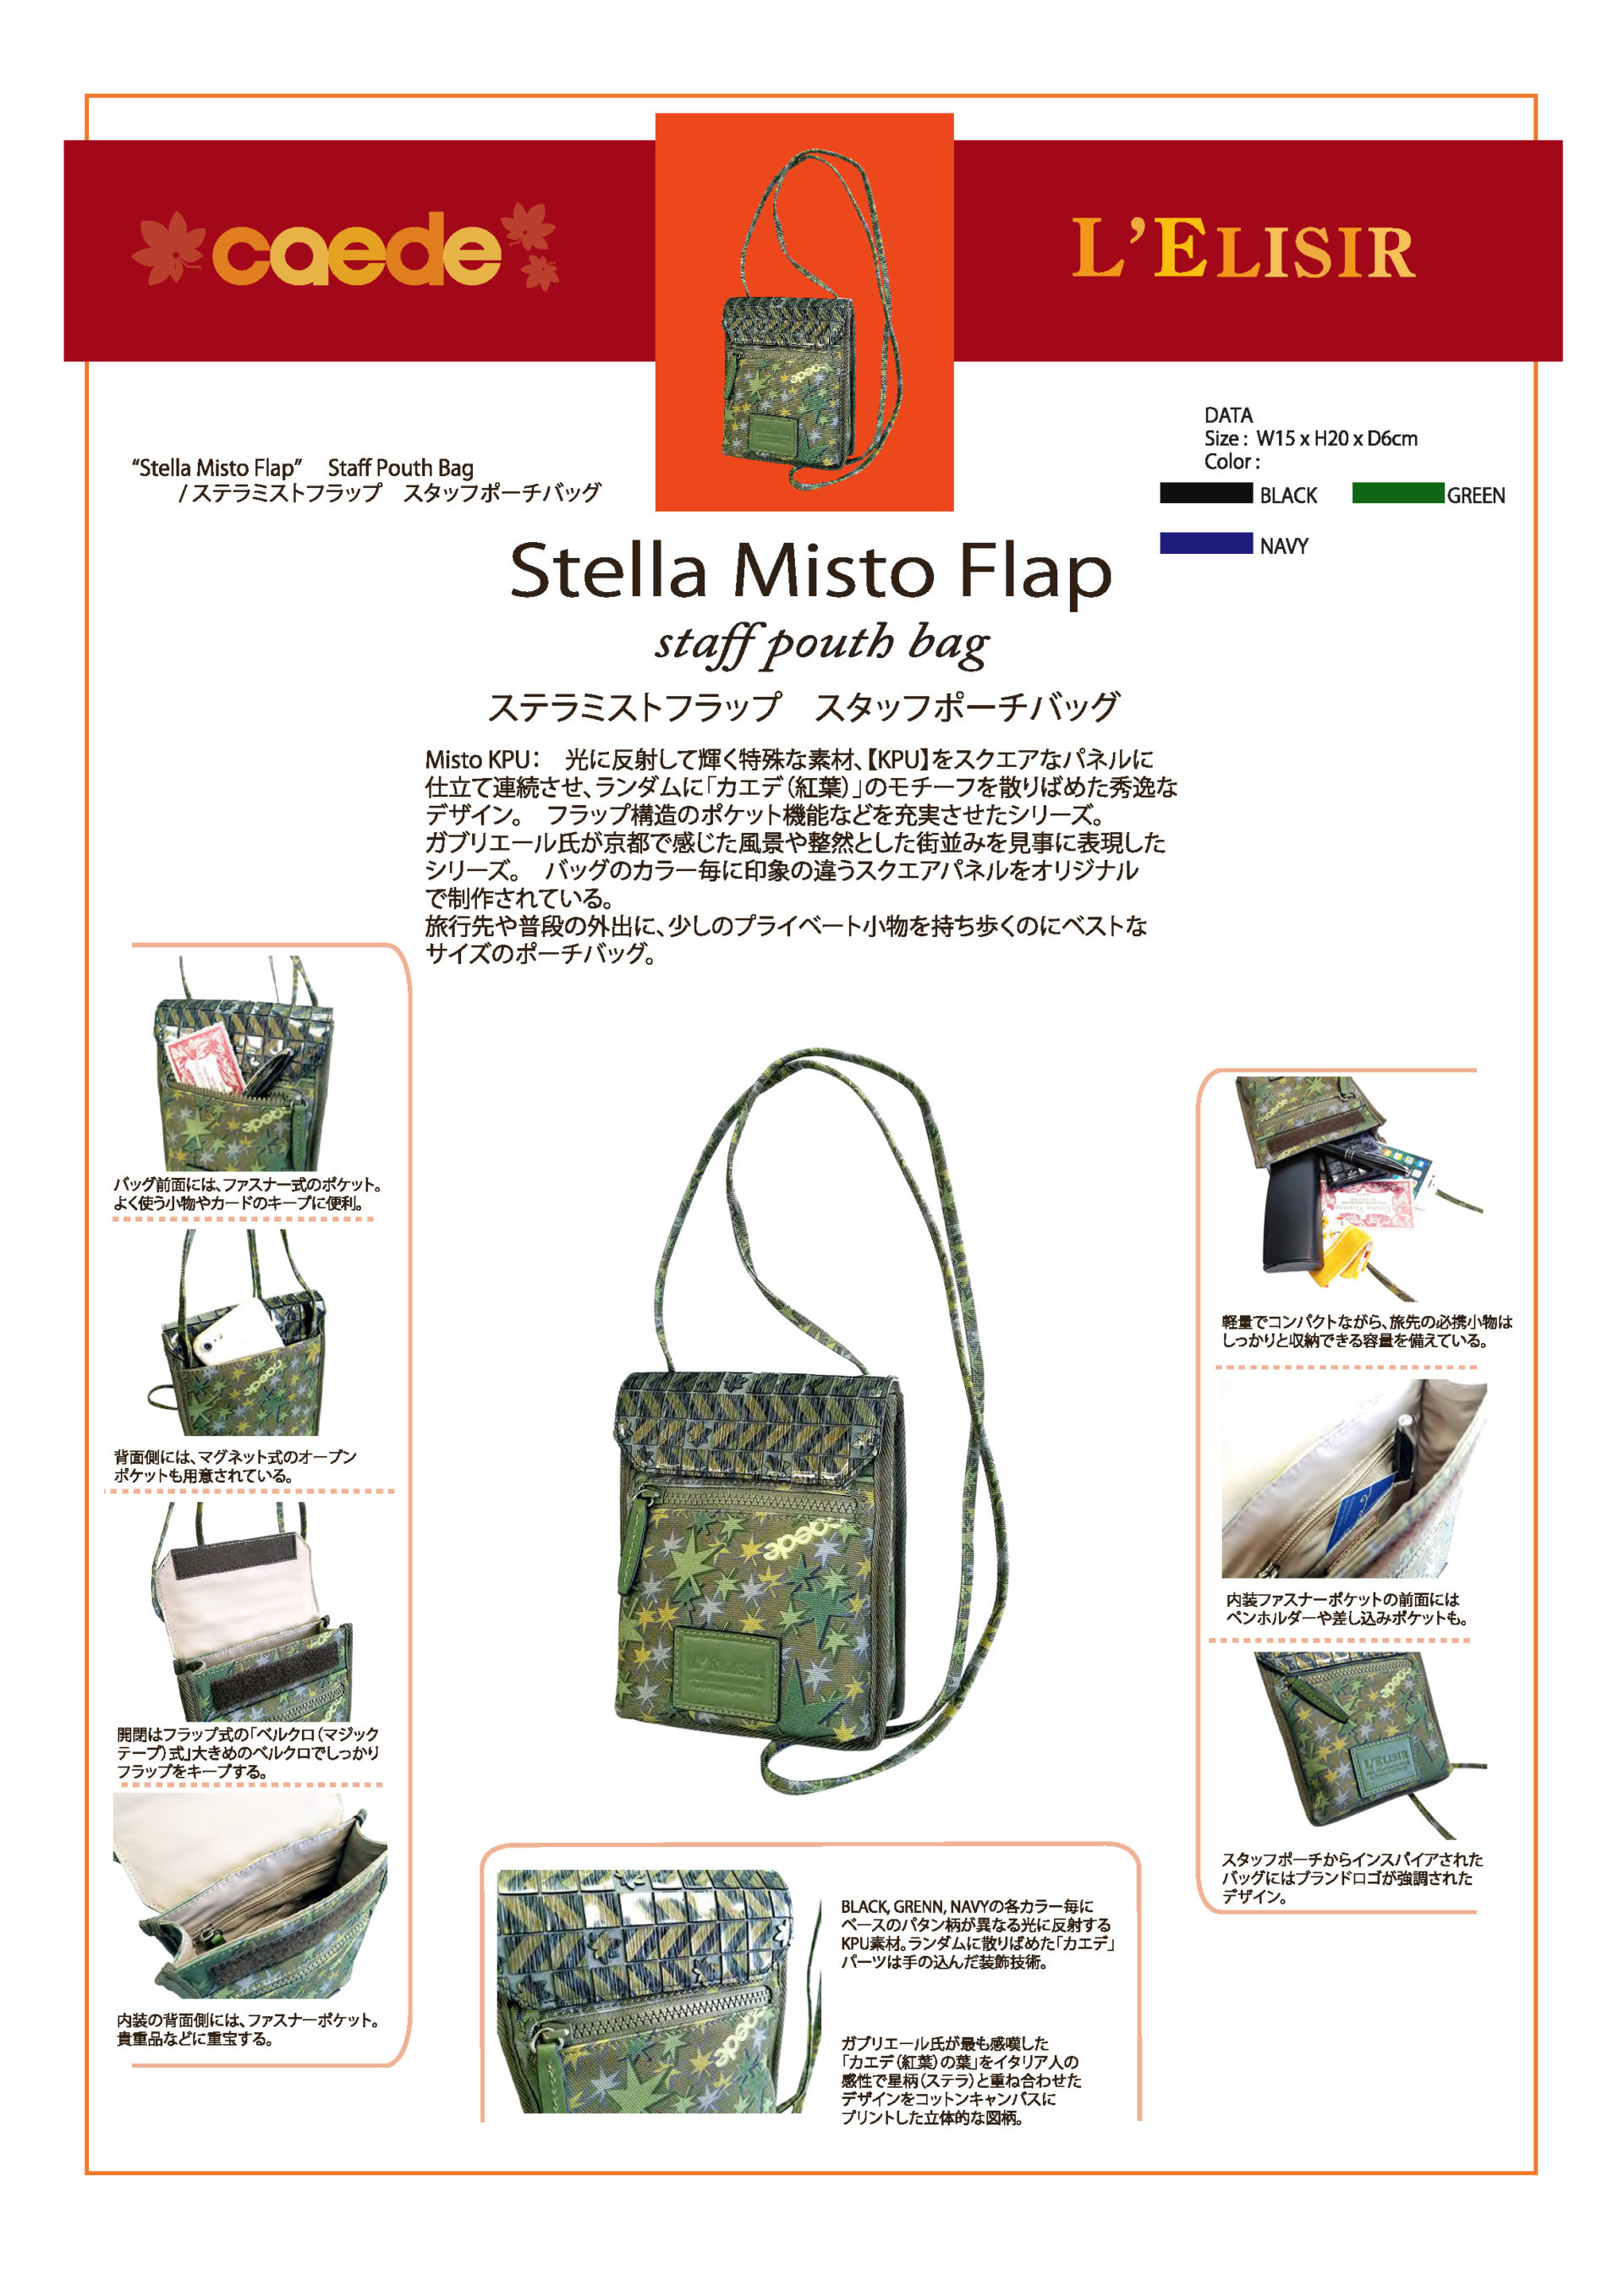 Stella Misto Flap Staff Pouth Bag | caede京都Collection